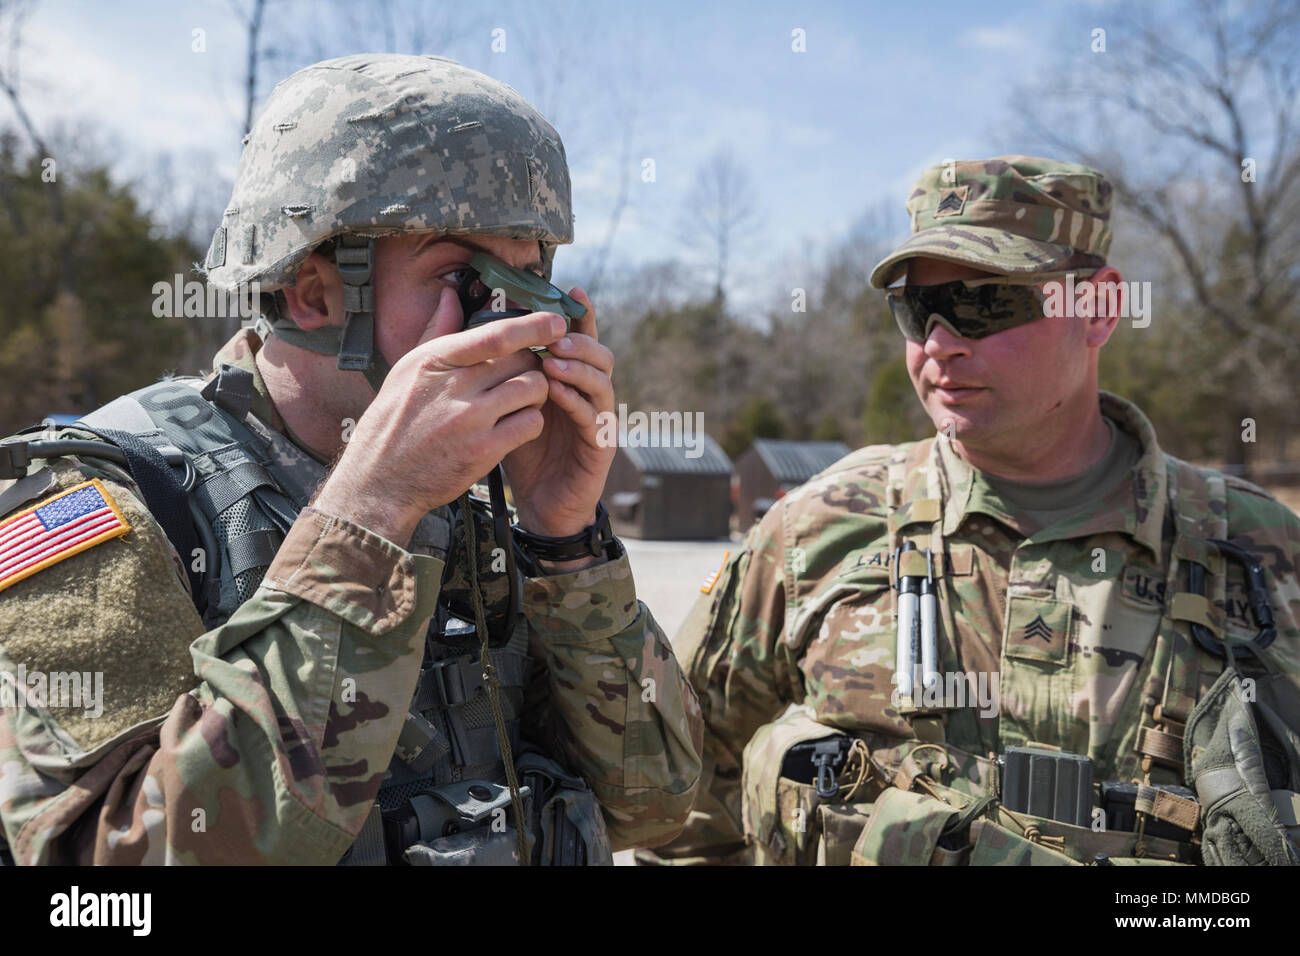 U.S. Army Reserve Sgt. Matthew Lafleur, with the 450th Civil Affairs Battalion, 364th Civil Affairs Brigade, Virginia Beach, Virginia, grades a Soldier during land navigation training, as part of the Combat Support Training Exercise (CSTX 78-18-03) at Fort Knox, Kentucky, March 18, 2018. CSTX 78-18-03 is a Combat Support Training Exercise that ensures America's Army Reserve units and Soldiers are trained and ready to deploy on short-notice and bring capable, combat-ready, and lethal firepower in support of the Army and our joint partners anywhere in the world. (U.S. Army Stock Photo